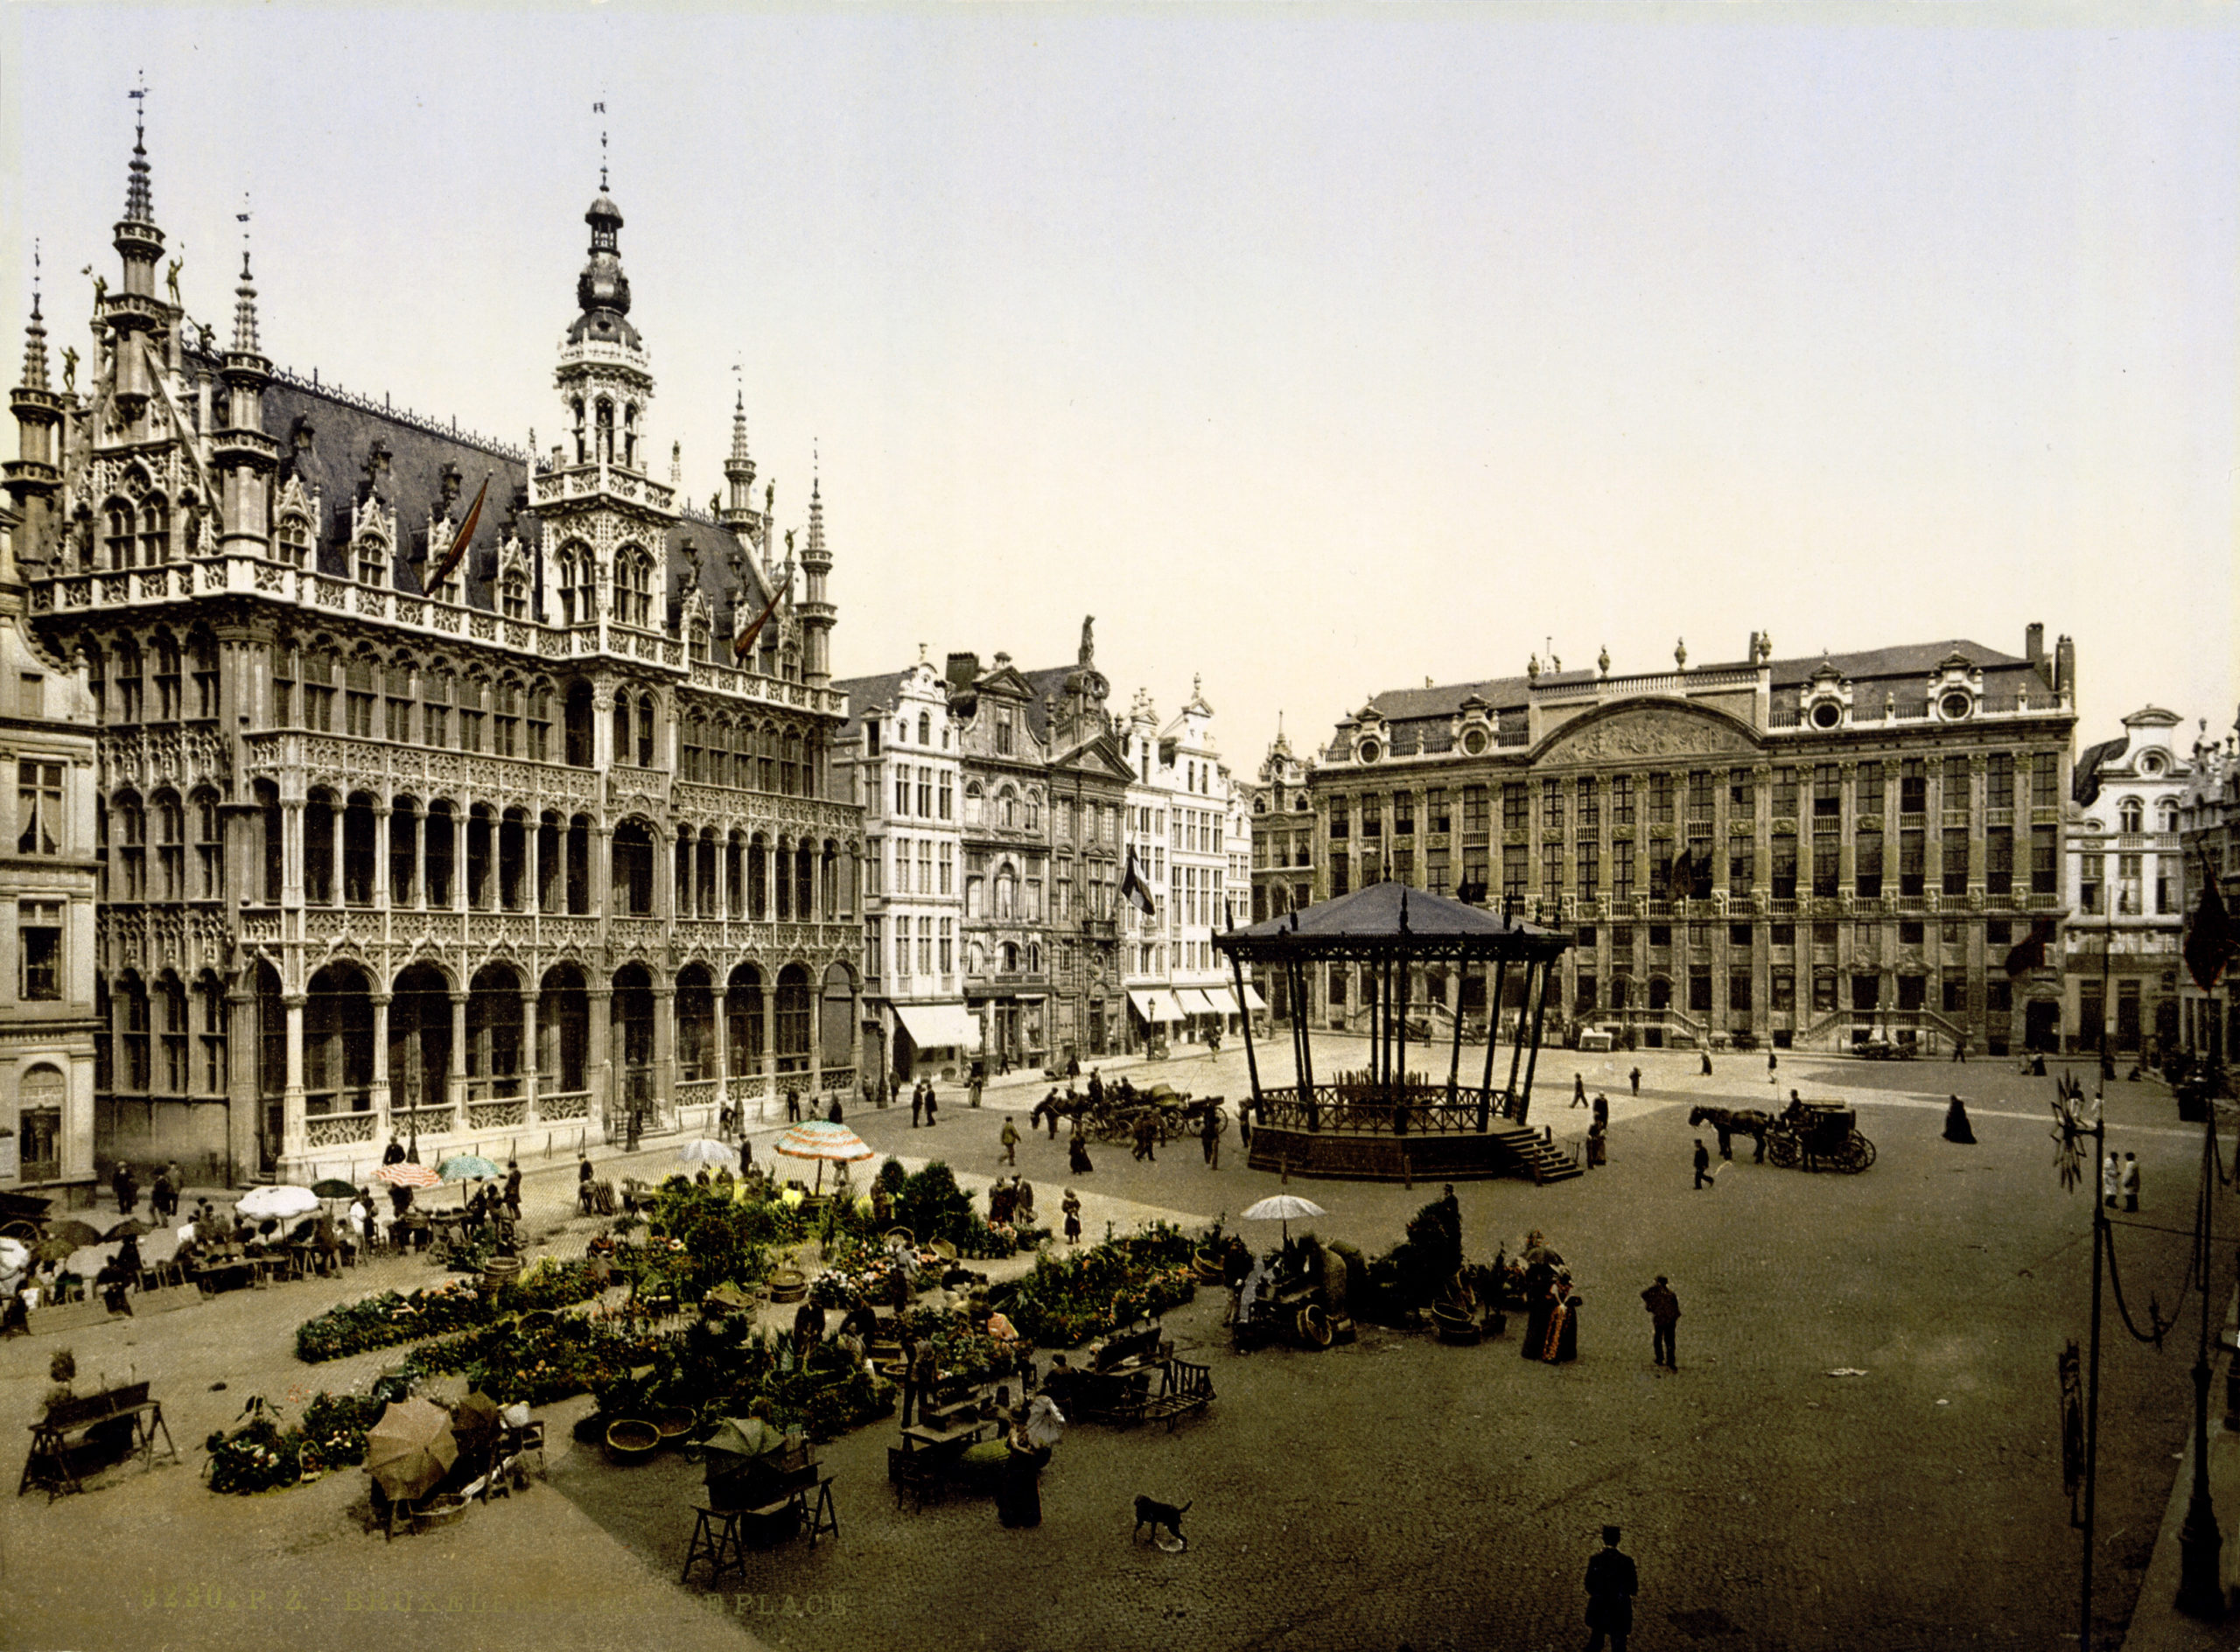 Historical Image of La Grand Place